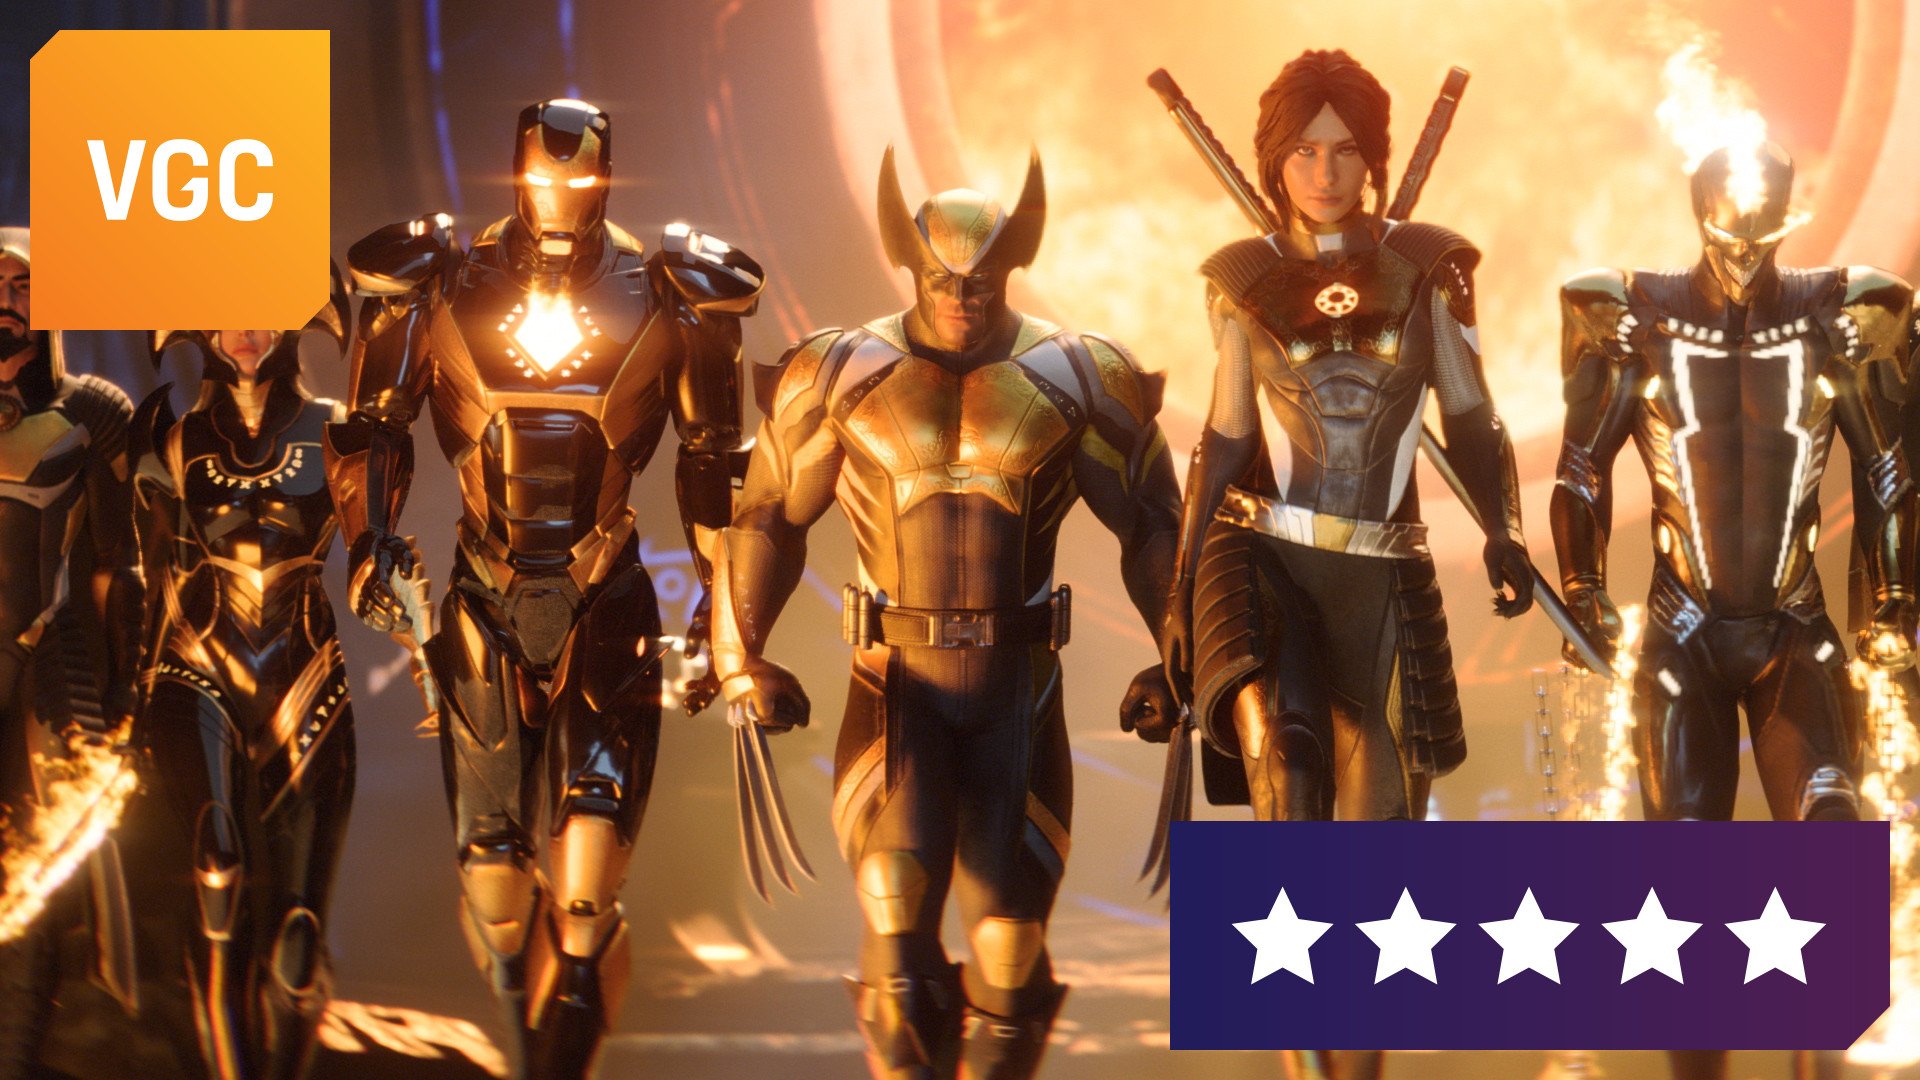 Marvel's Midnight Suns Review: Exhausting Yet Charming